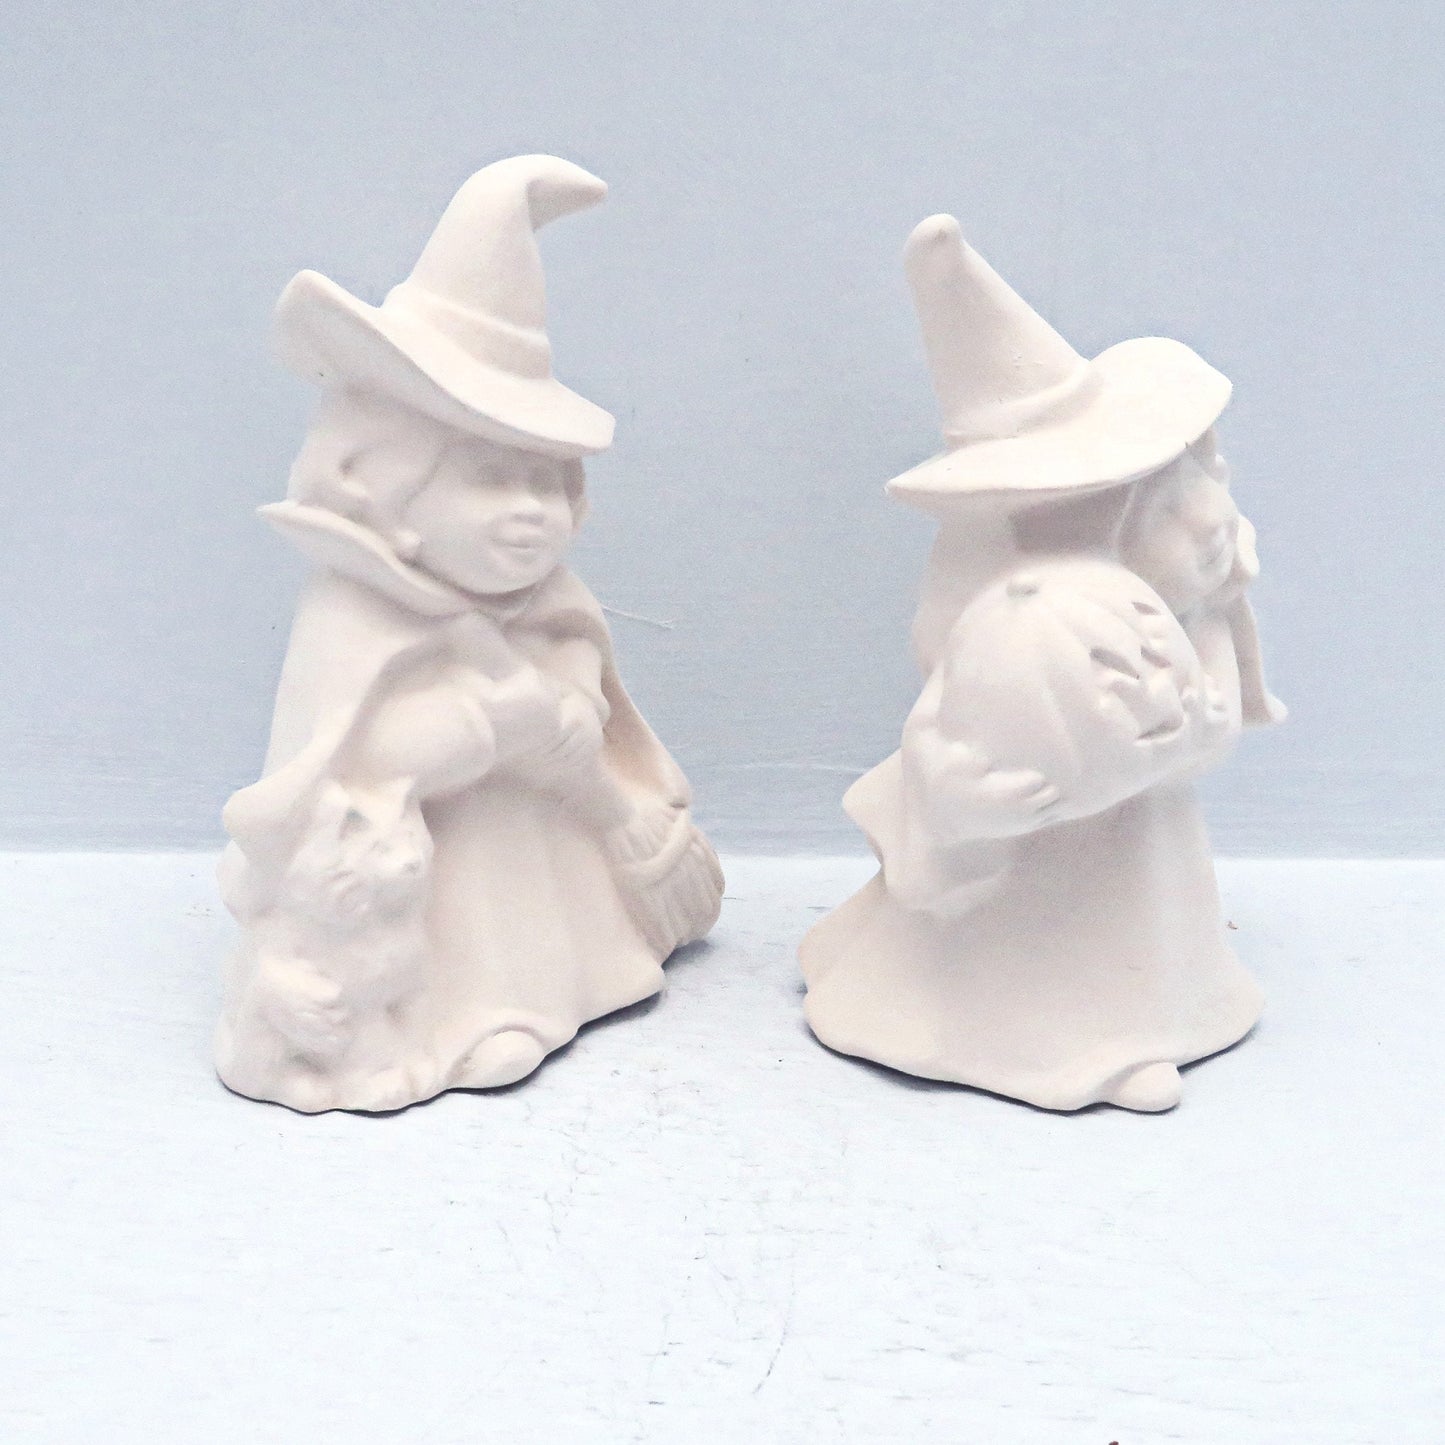 Handmade Ceramic Witch Statues, Witch Figurines, Halloween Decor, Unpainted Bisque, Ready to Paint Ceramics, Paintable Ceramics